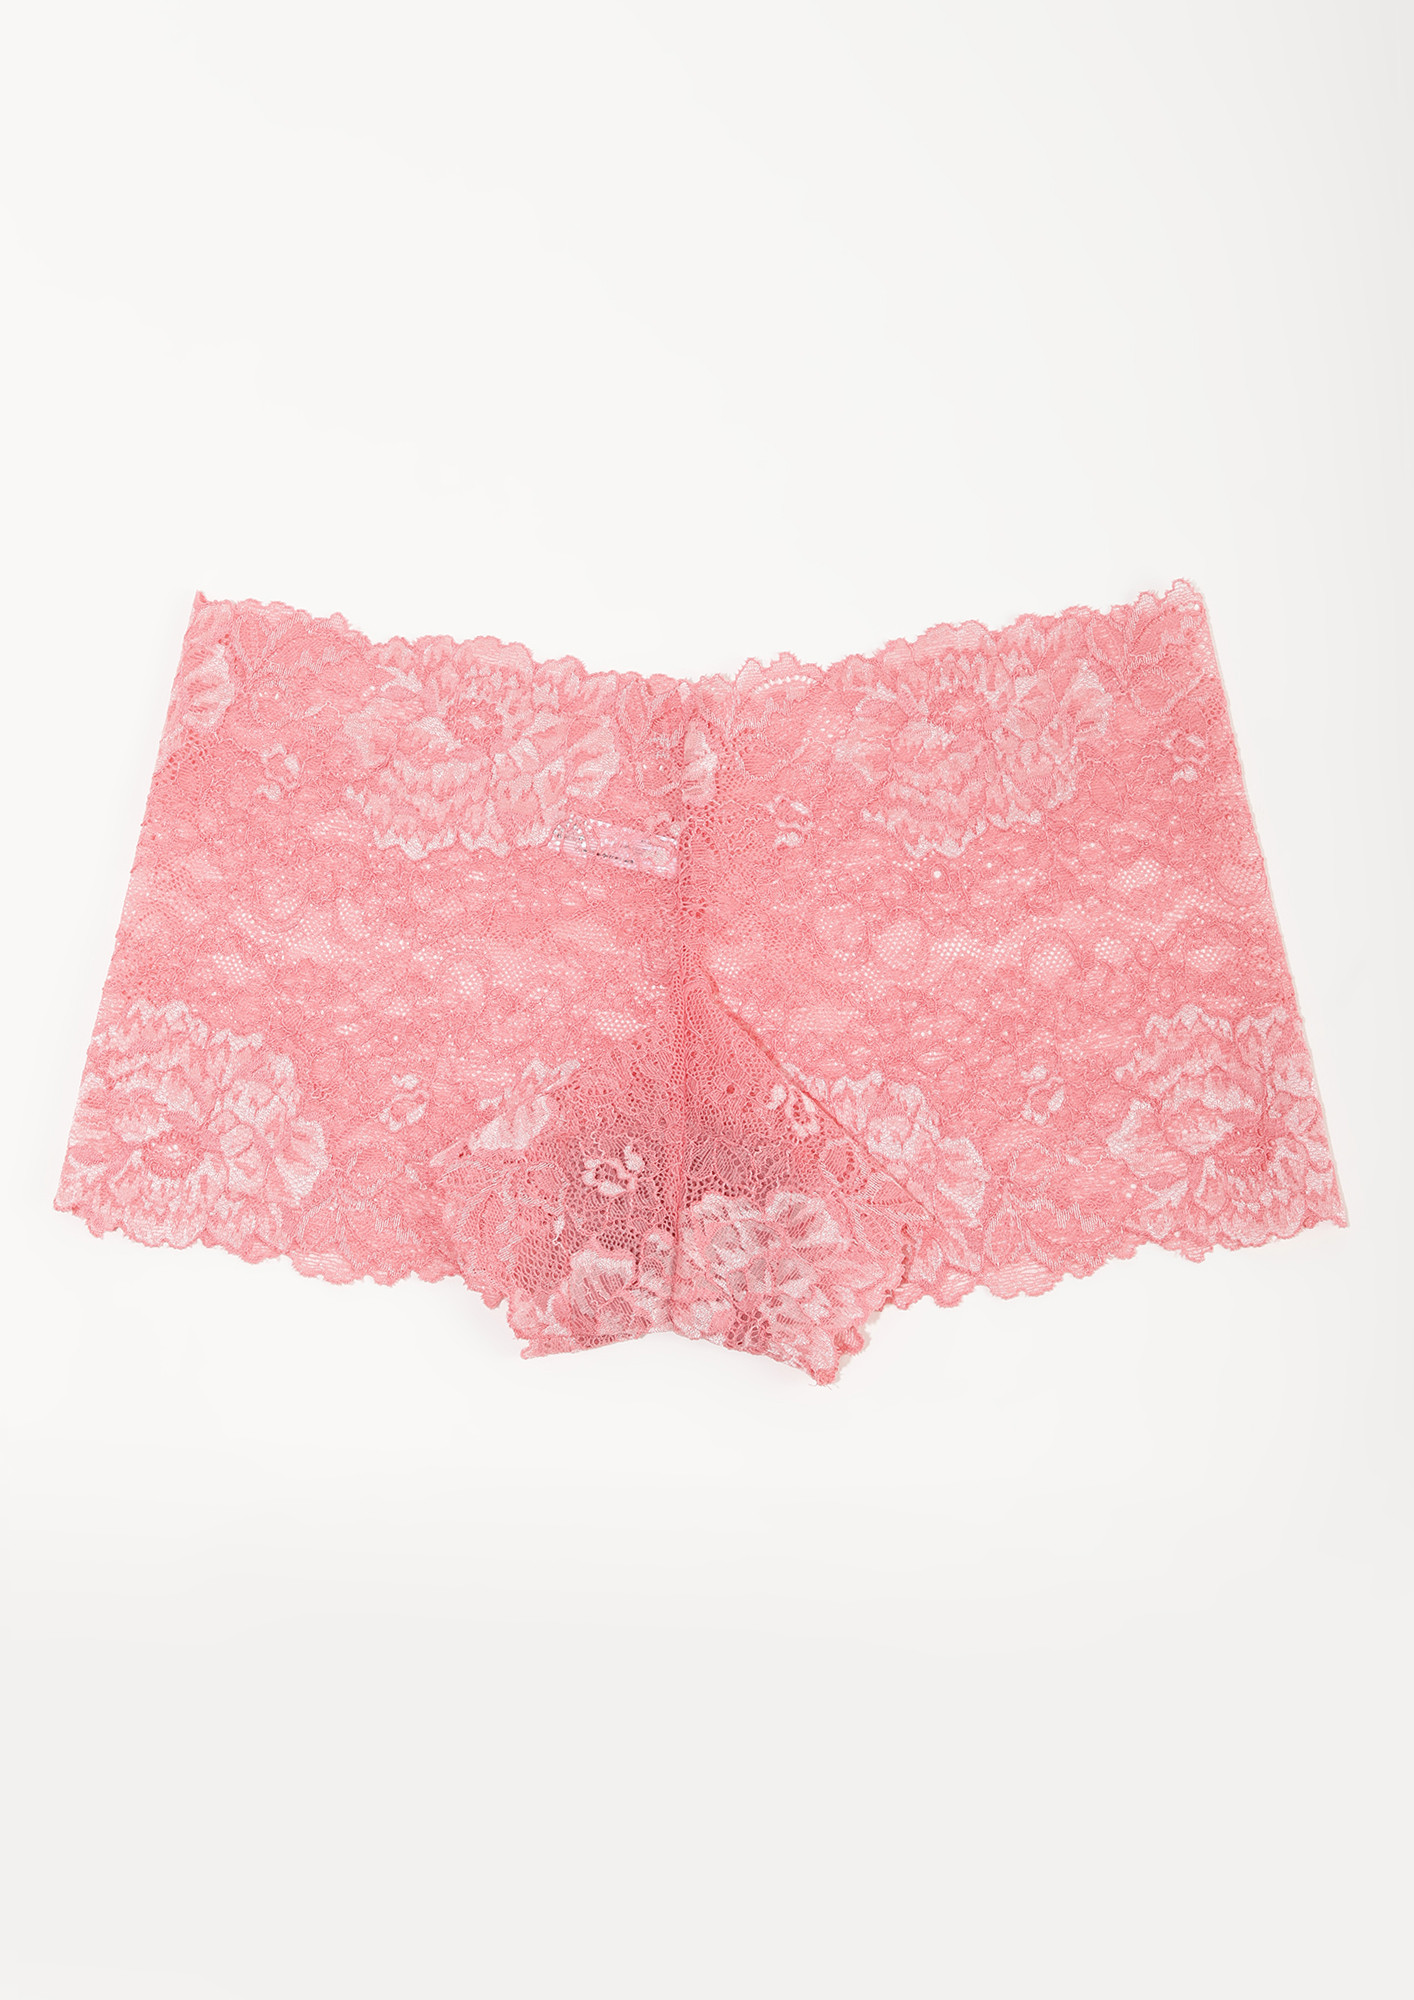 Boy Shorts - 100% Silk - Black with Pink Lace – everjune